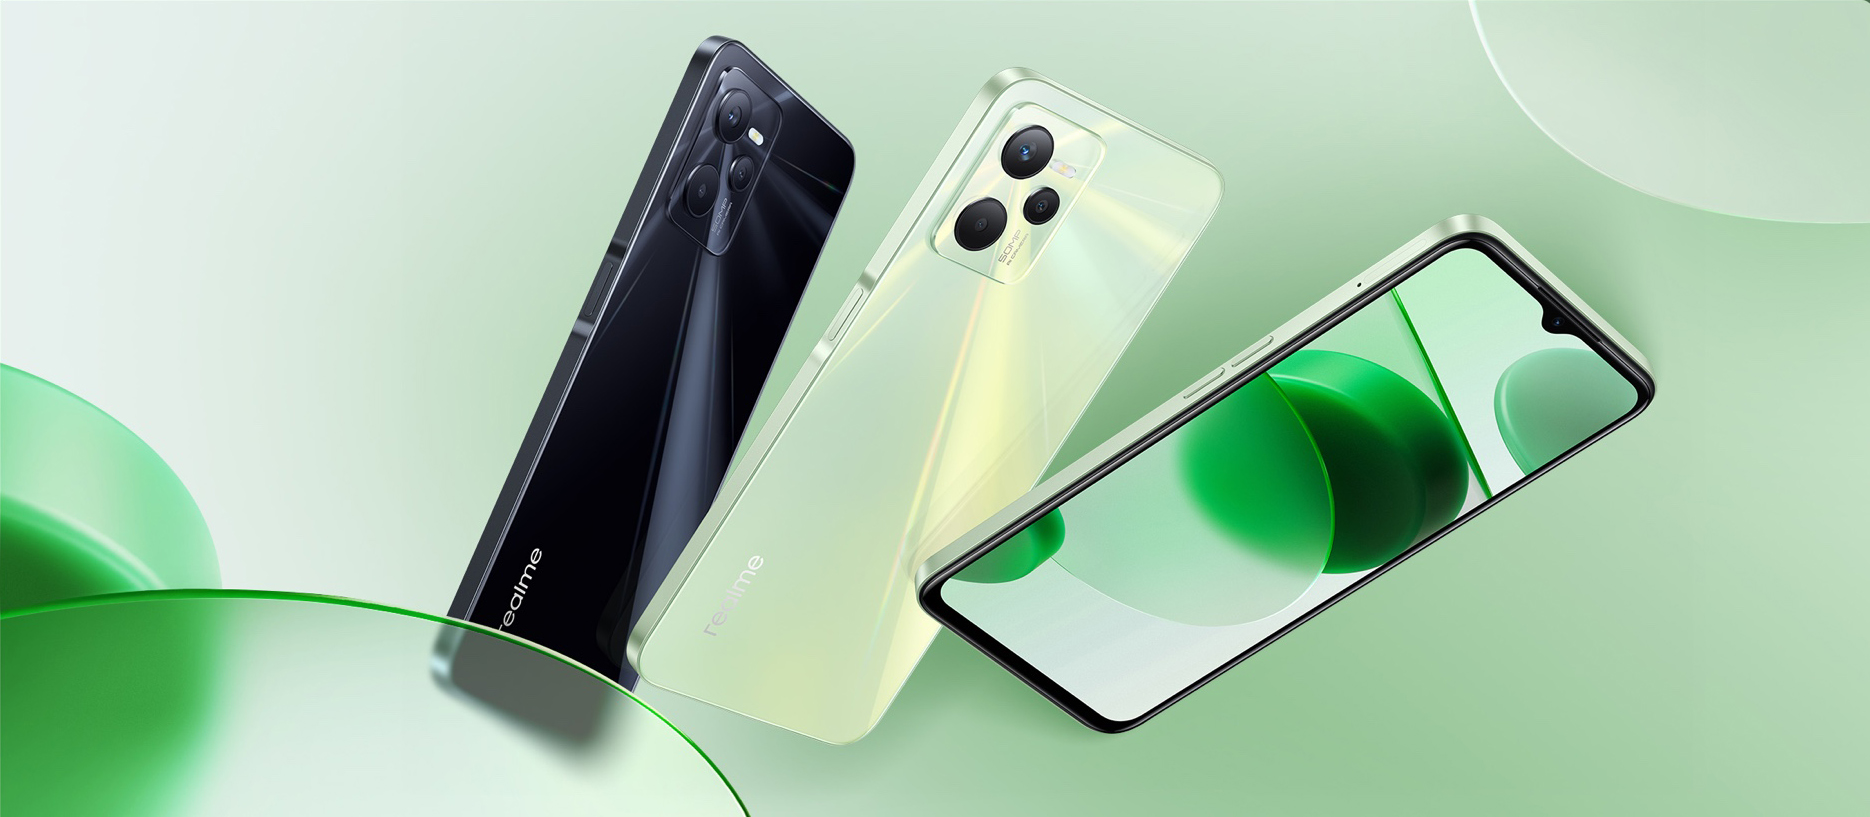 Realme C55 is launching soon in Europe -  news